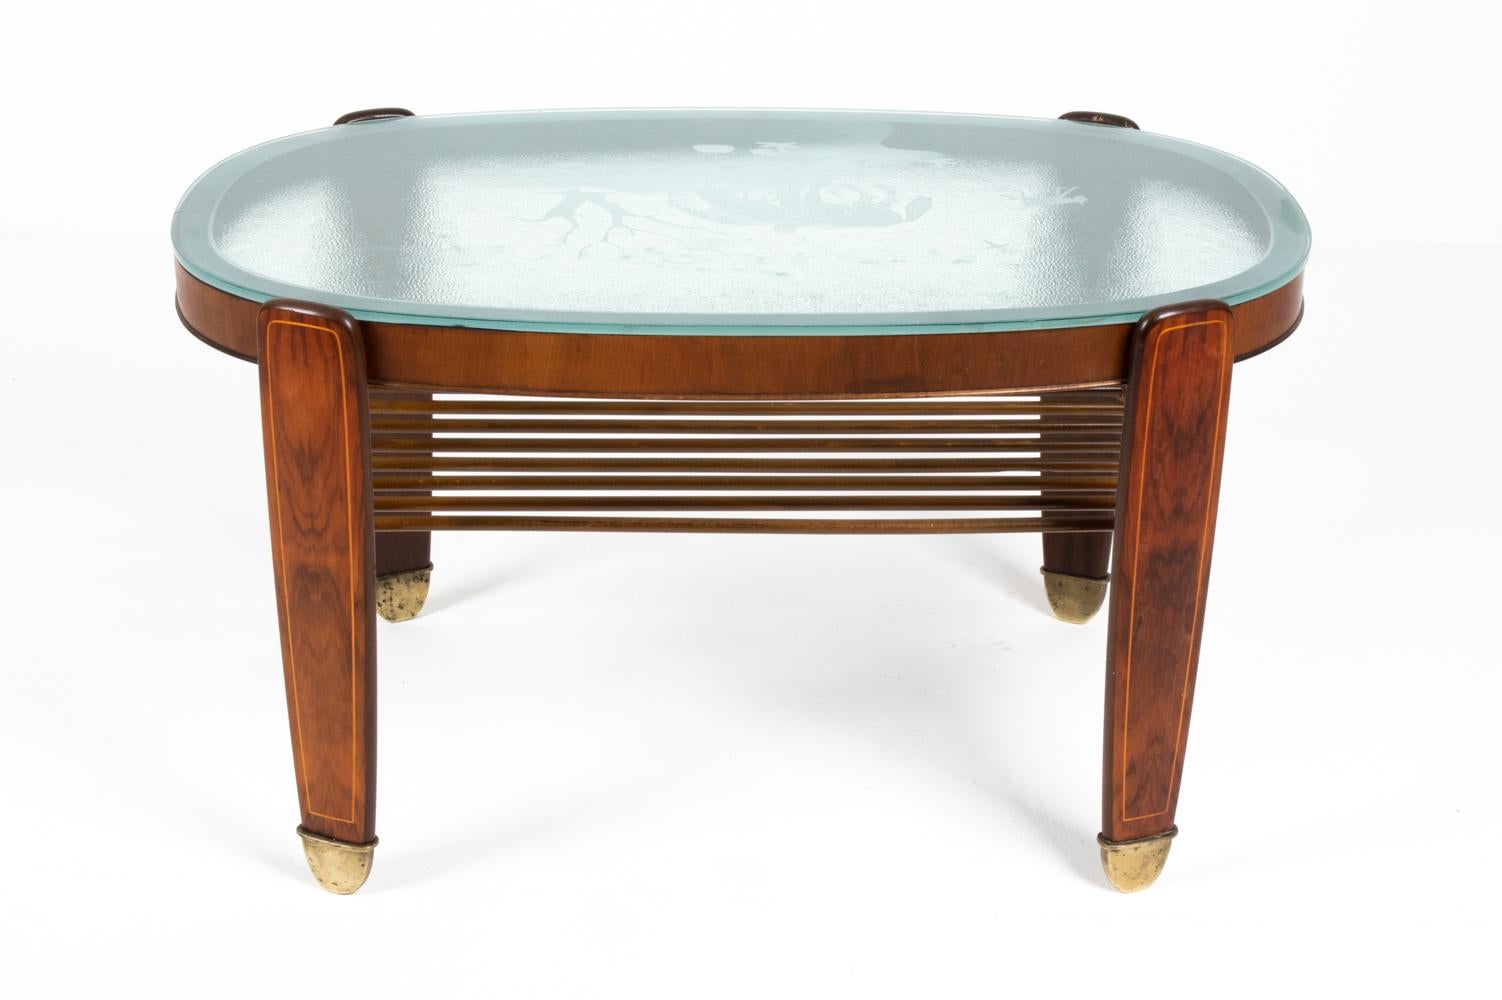 Edmund Jørgensen Danish Art Deco Coffee Table with Scenic Etched Glass Top For Sale 7